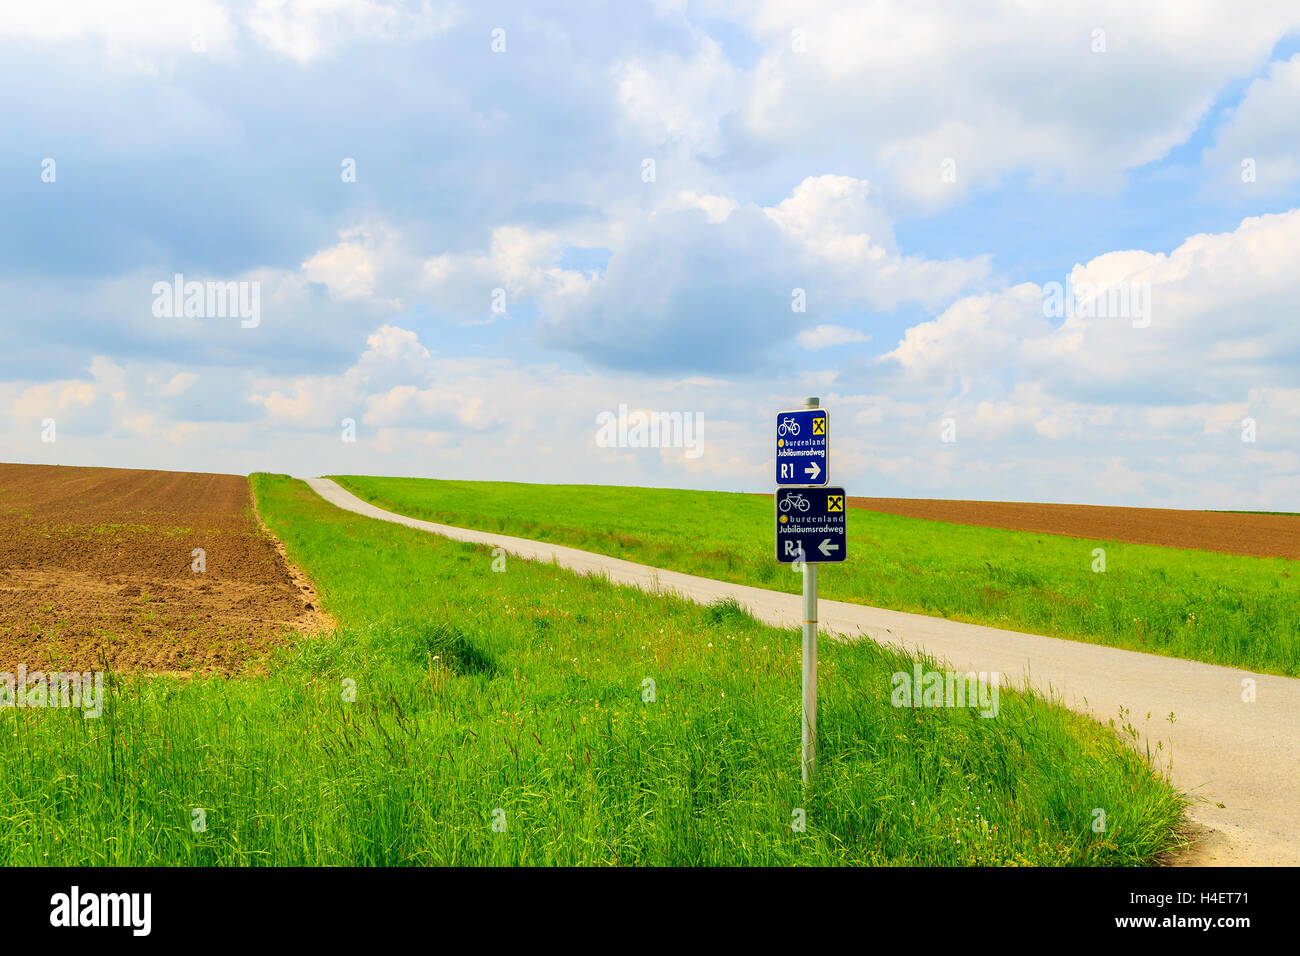 Rural road in green farming field and blue sky with white clouds, Burgenland, southern Austria Stock Photo